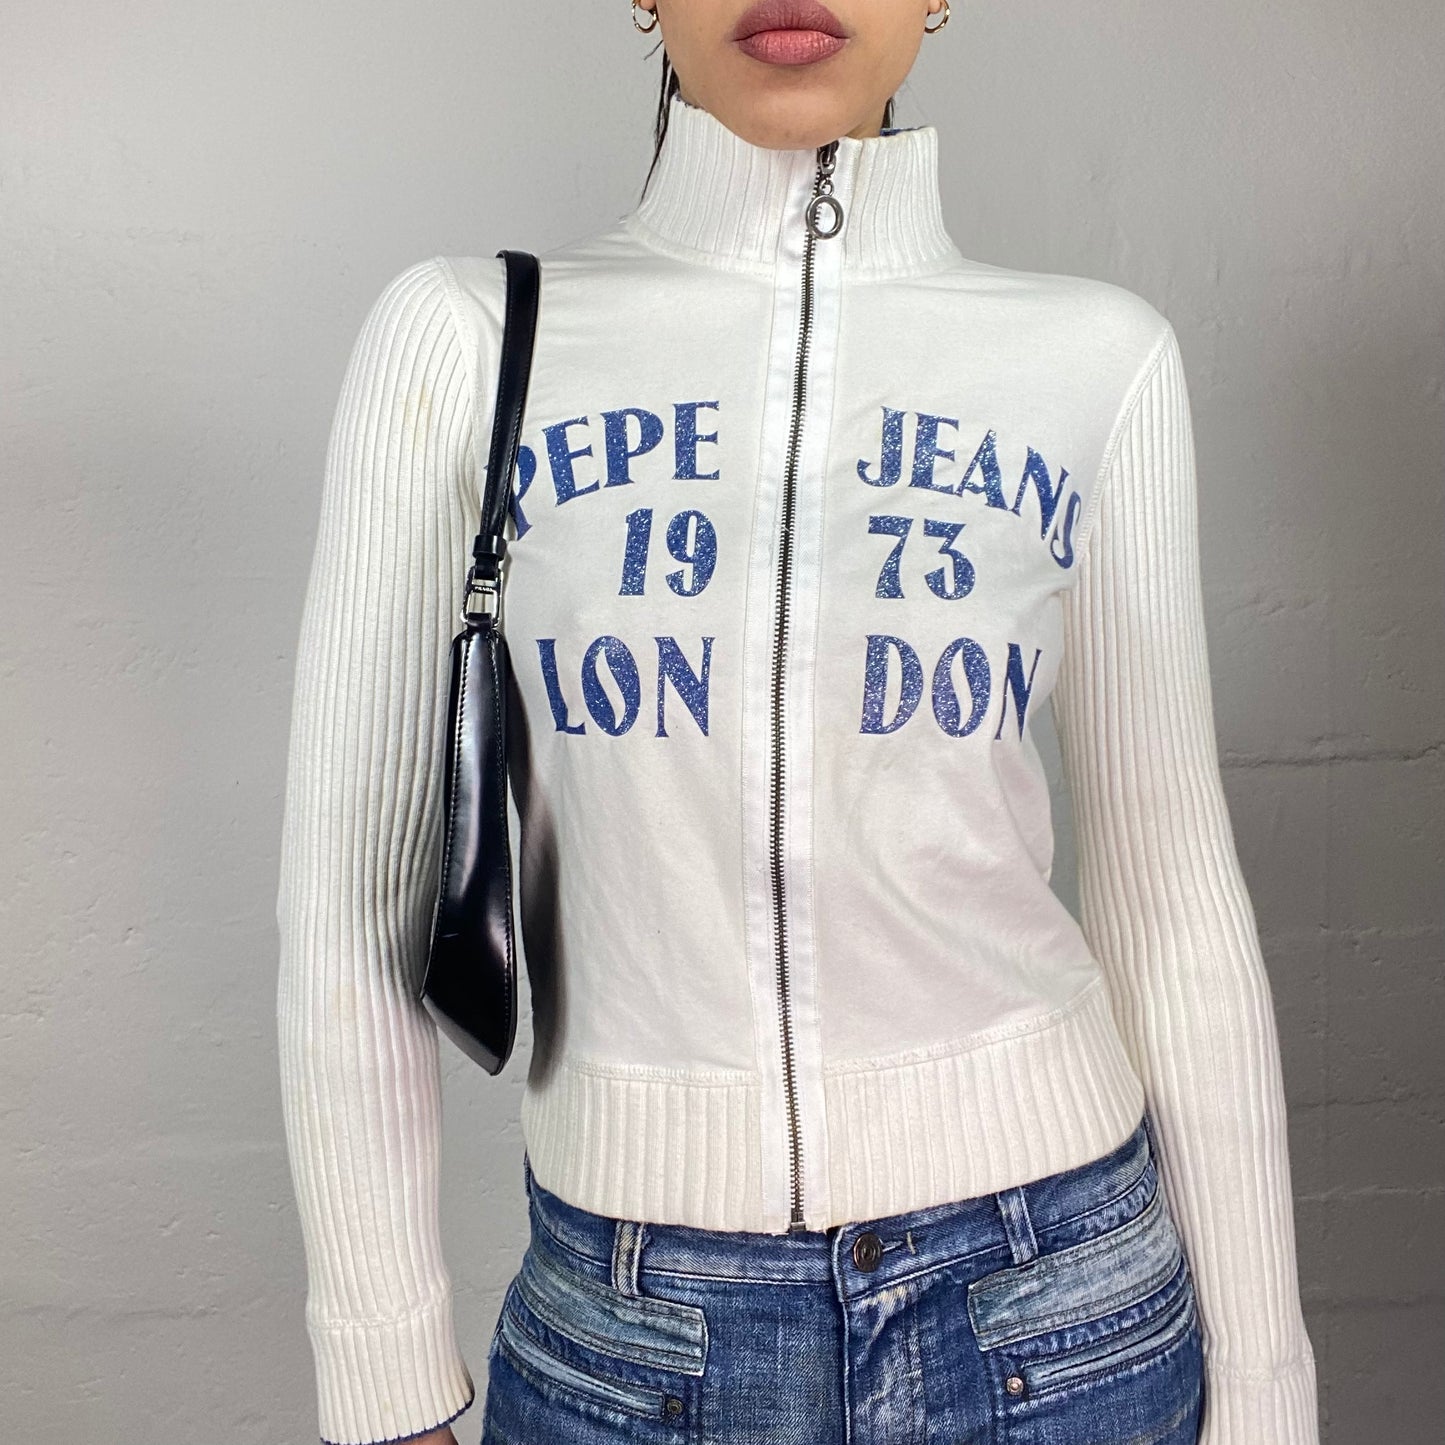 Vintage 2000's Pepe Jeans Sporty White Zip Up Sweater with Blue Brand "London 73" Print (S)